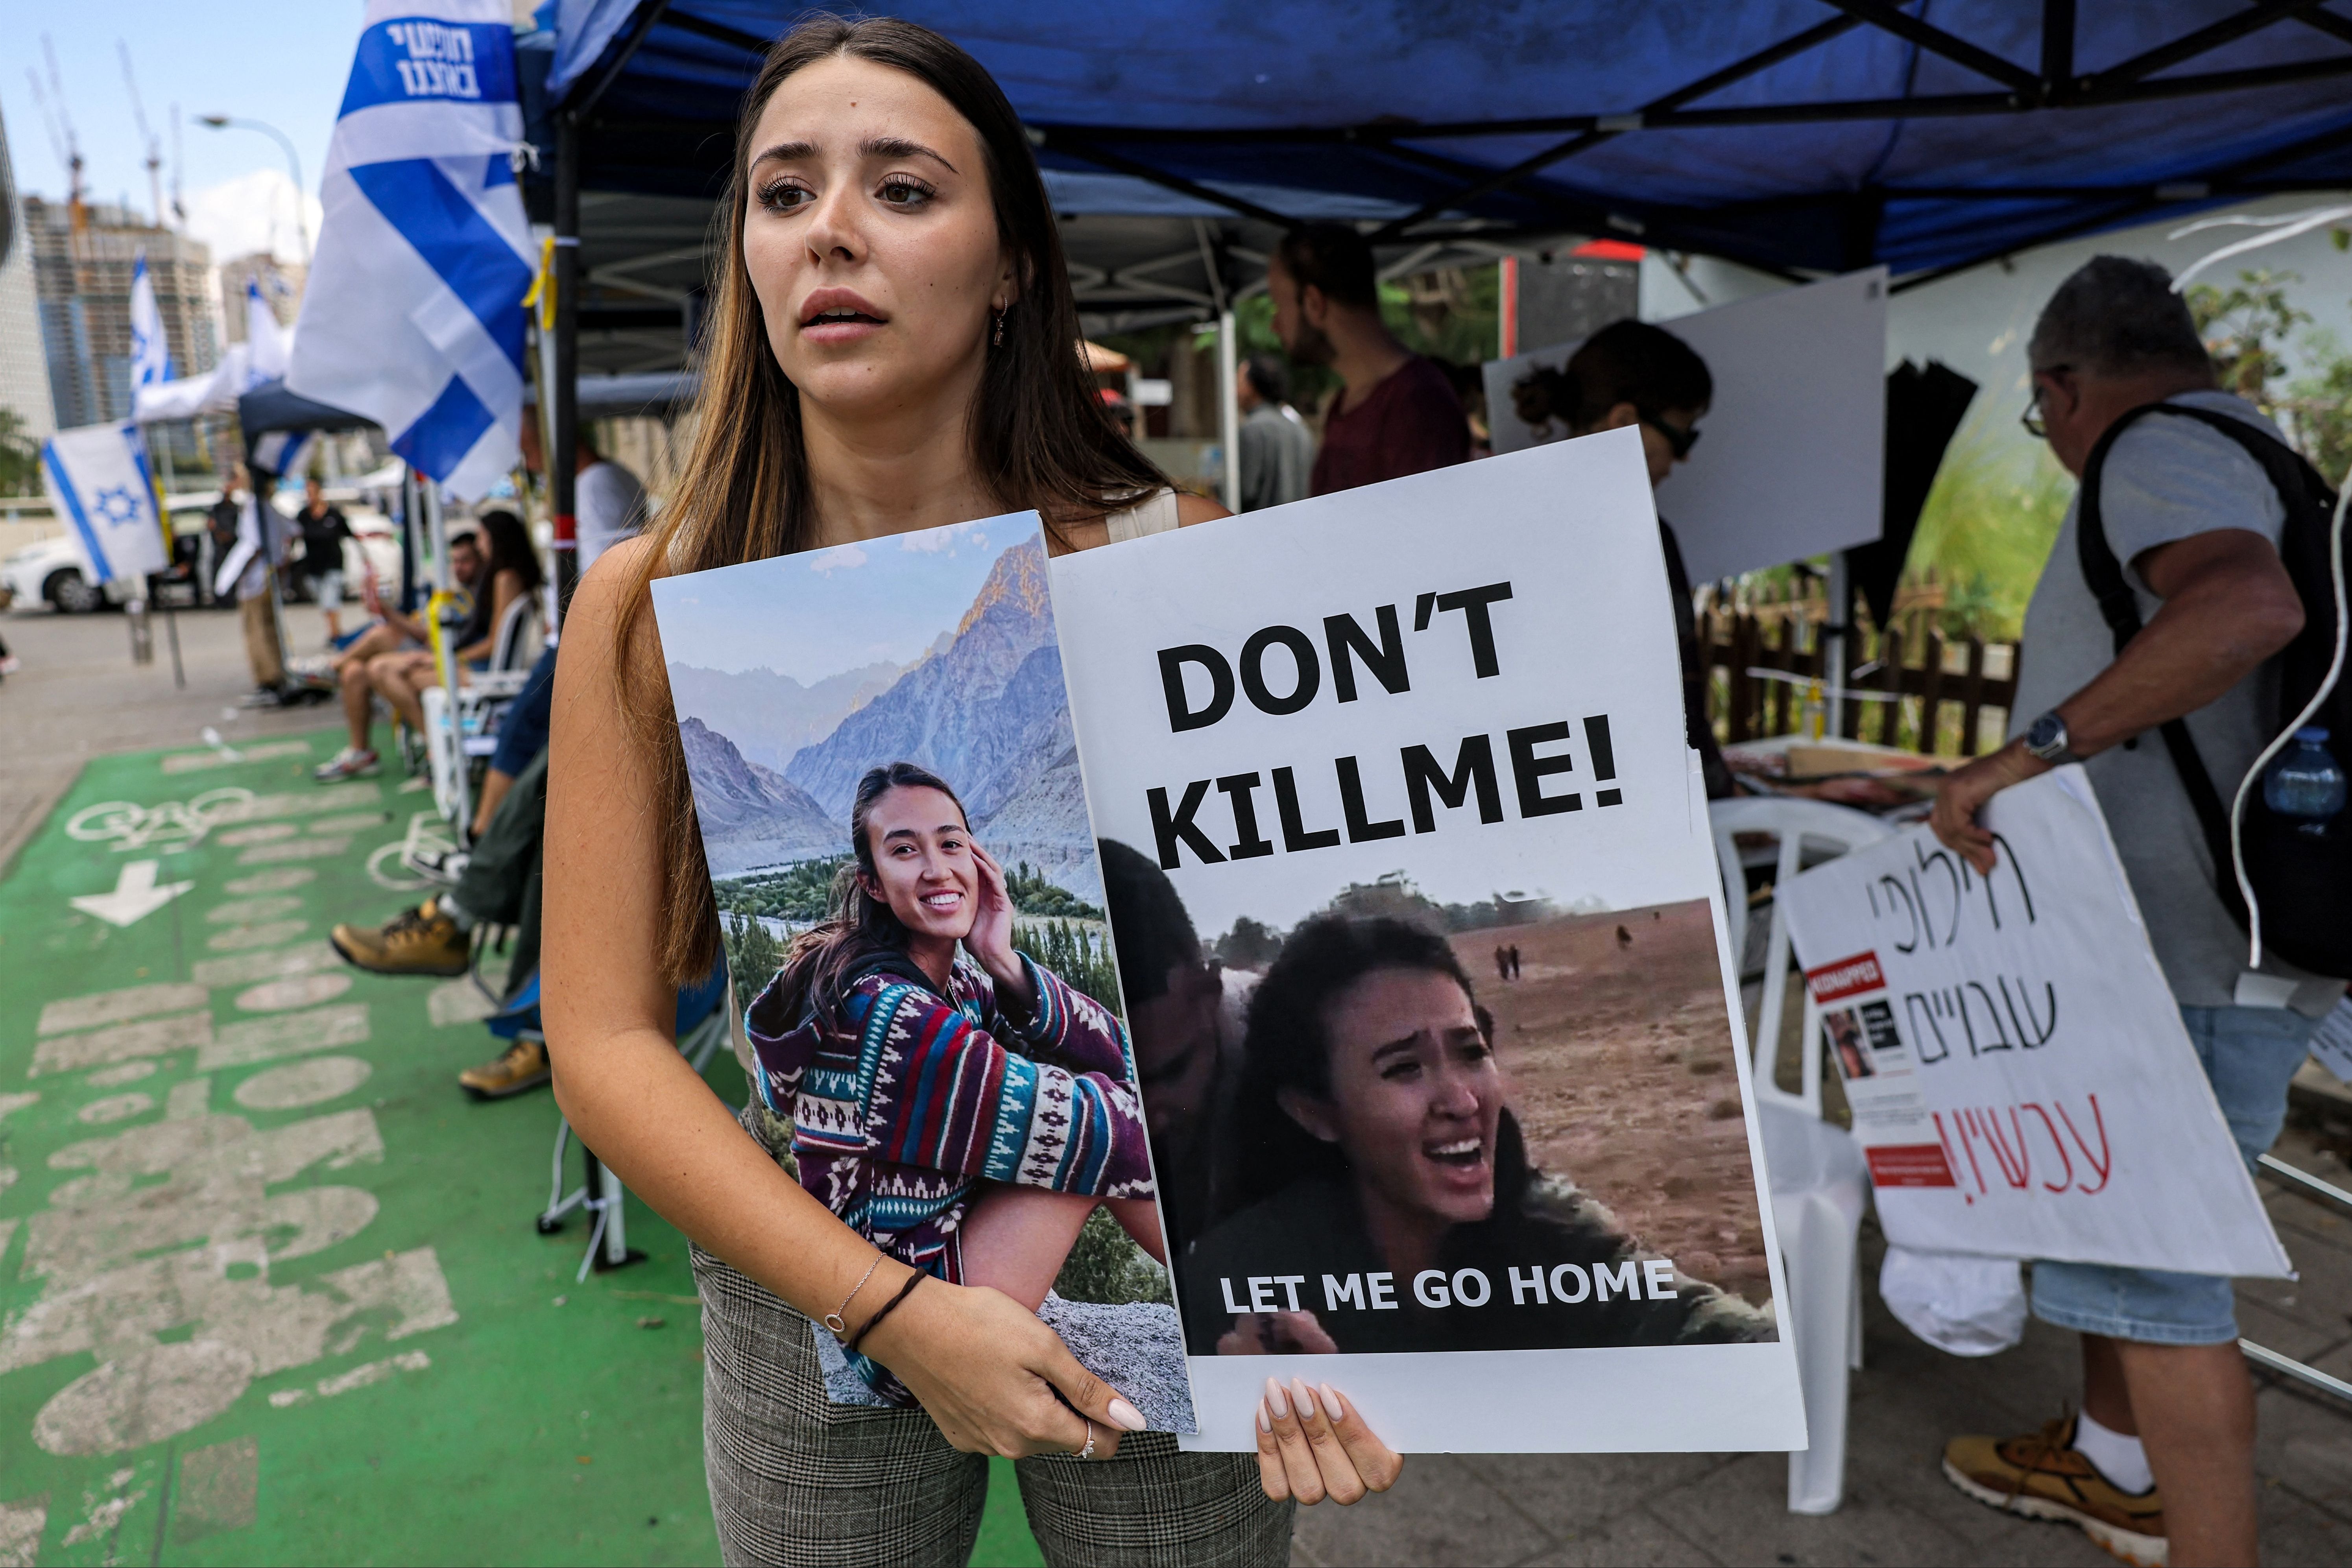 A friend of Israeli student Noa Argamani, one of the Israeli hostages held by Hamas, stands with a sign showing her face